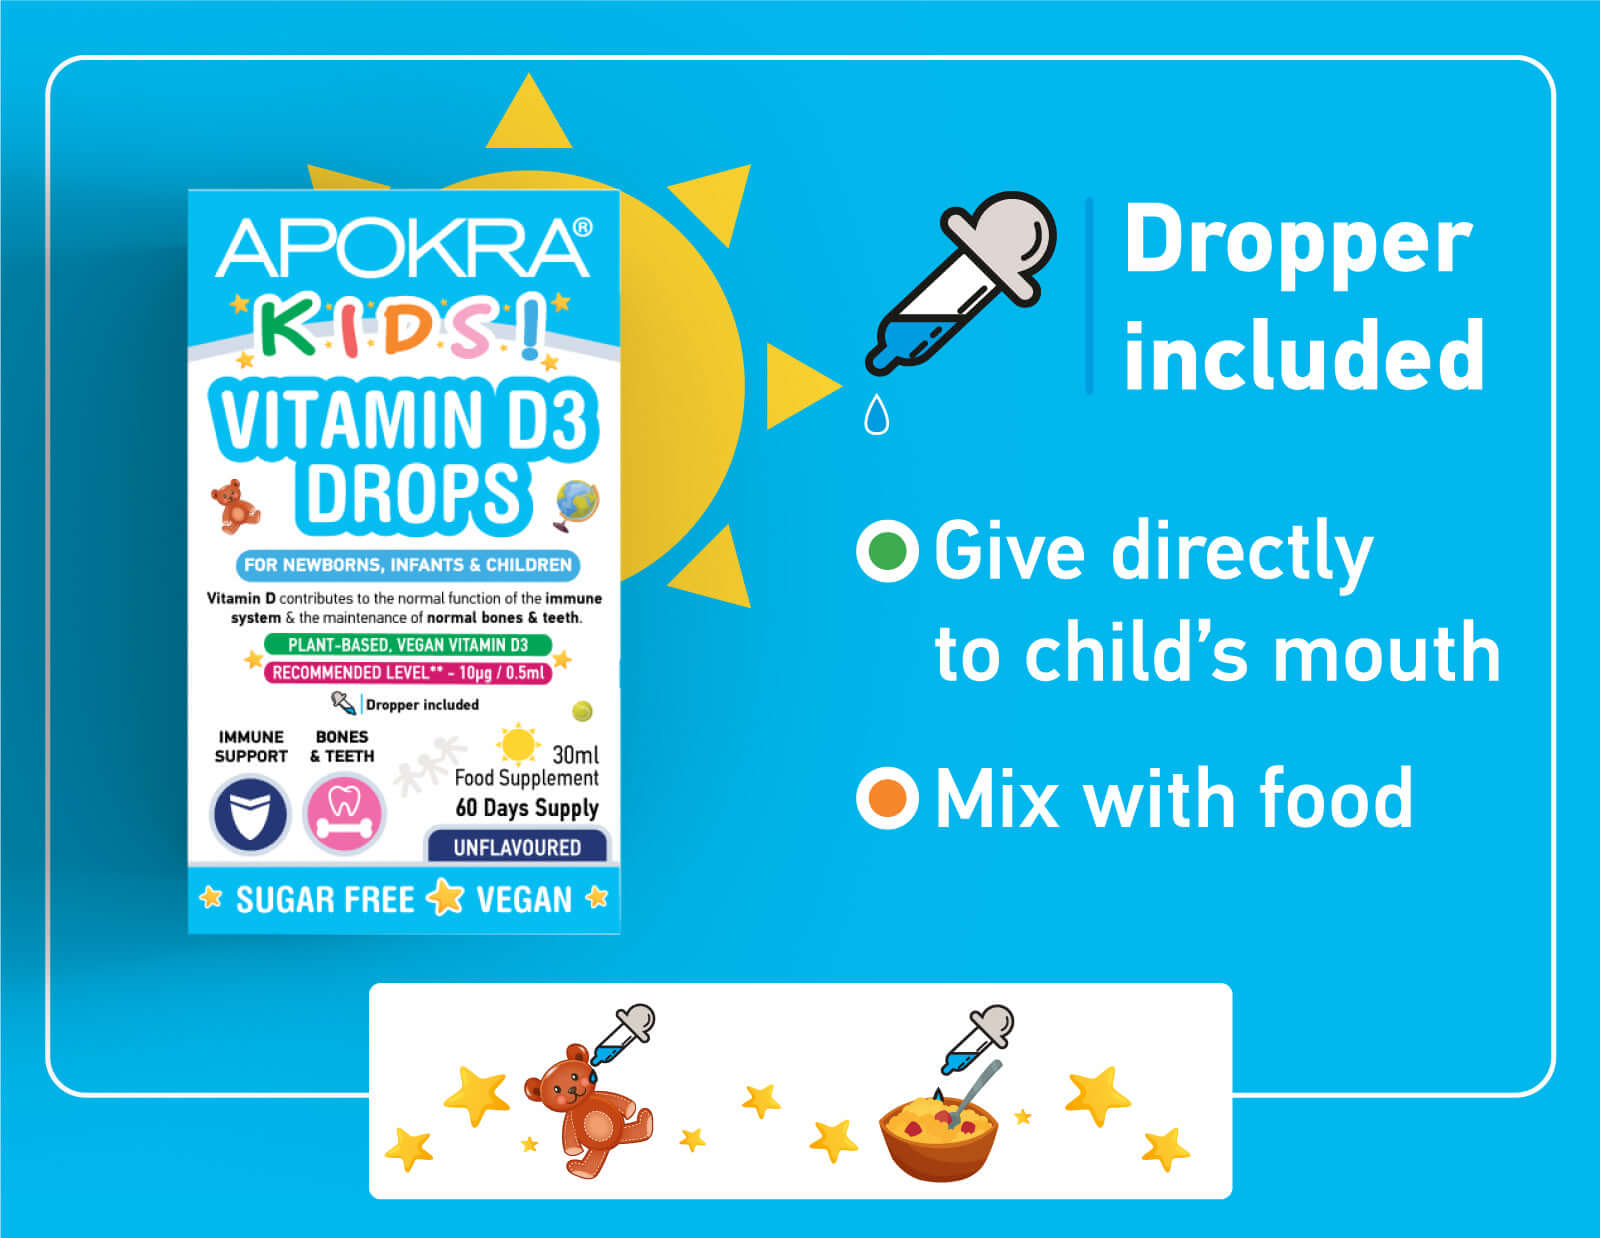 APOKRA Kids Vitamin D3 drops can be mixed with food or given directly from the dropper